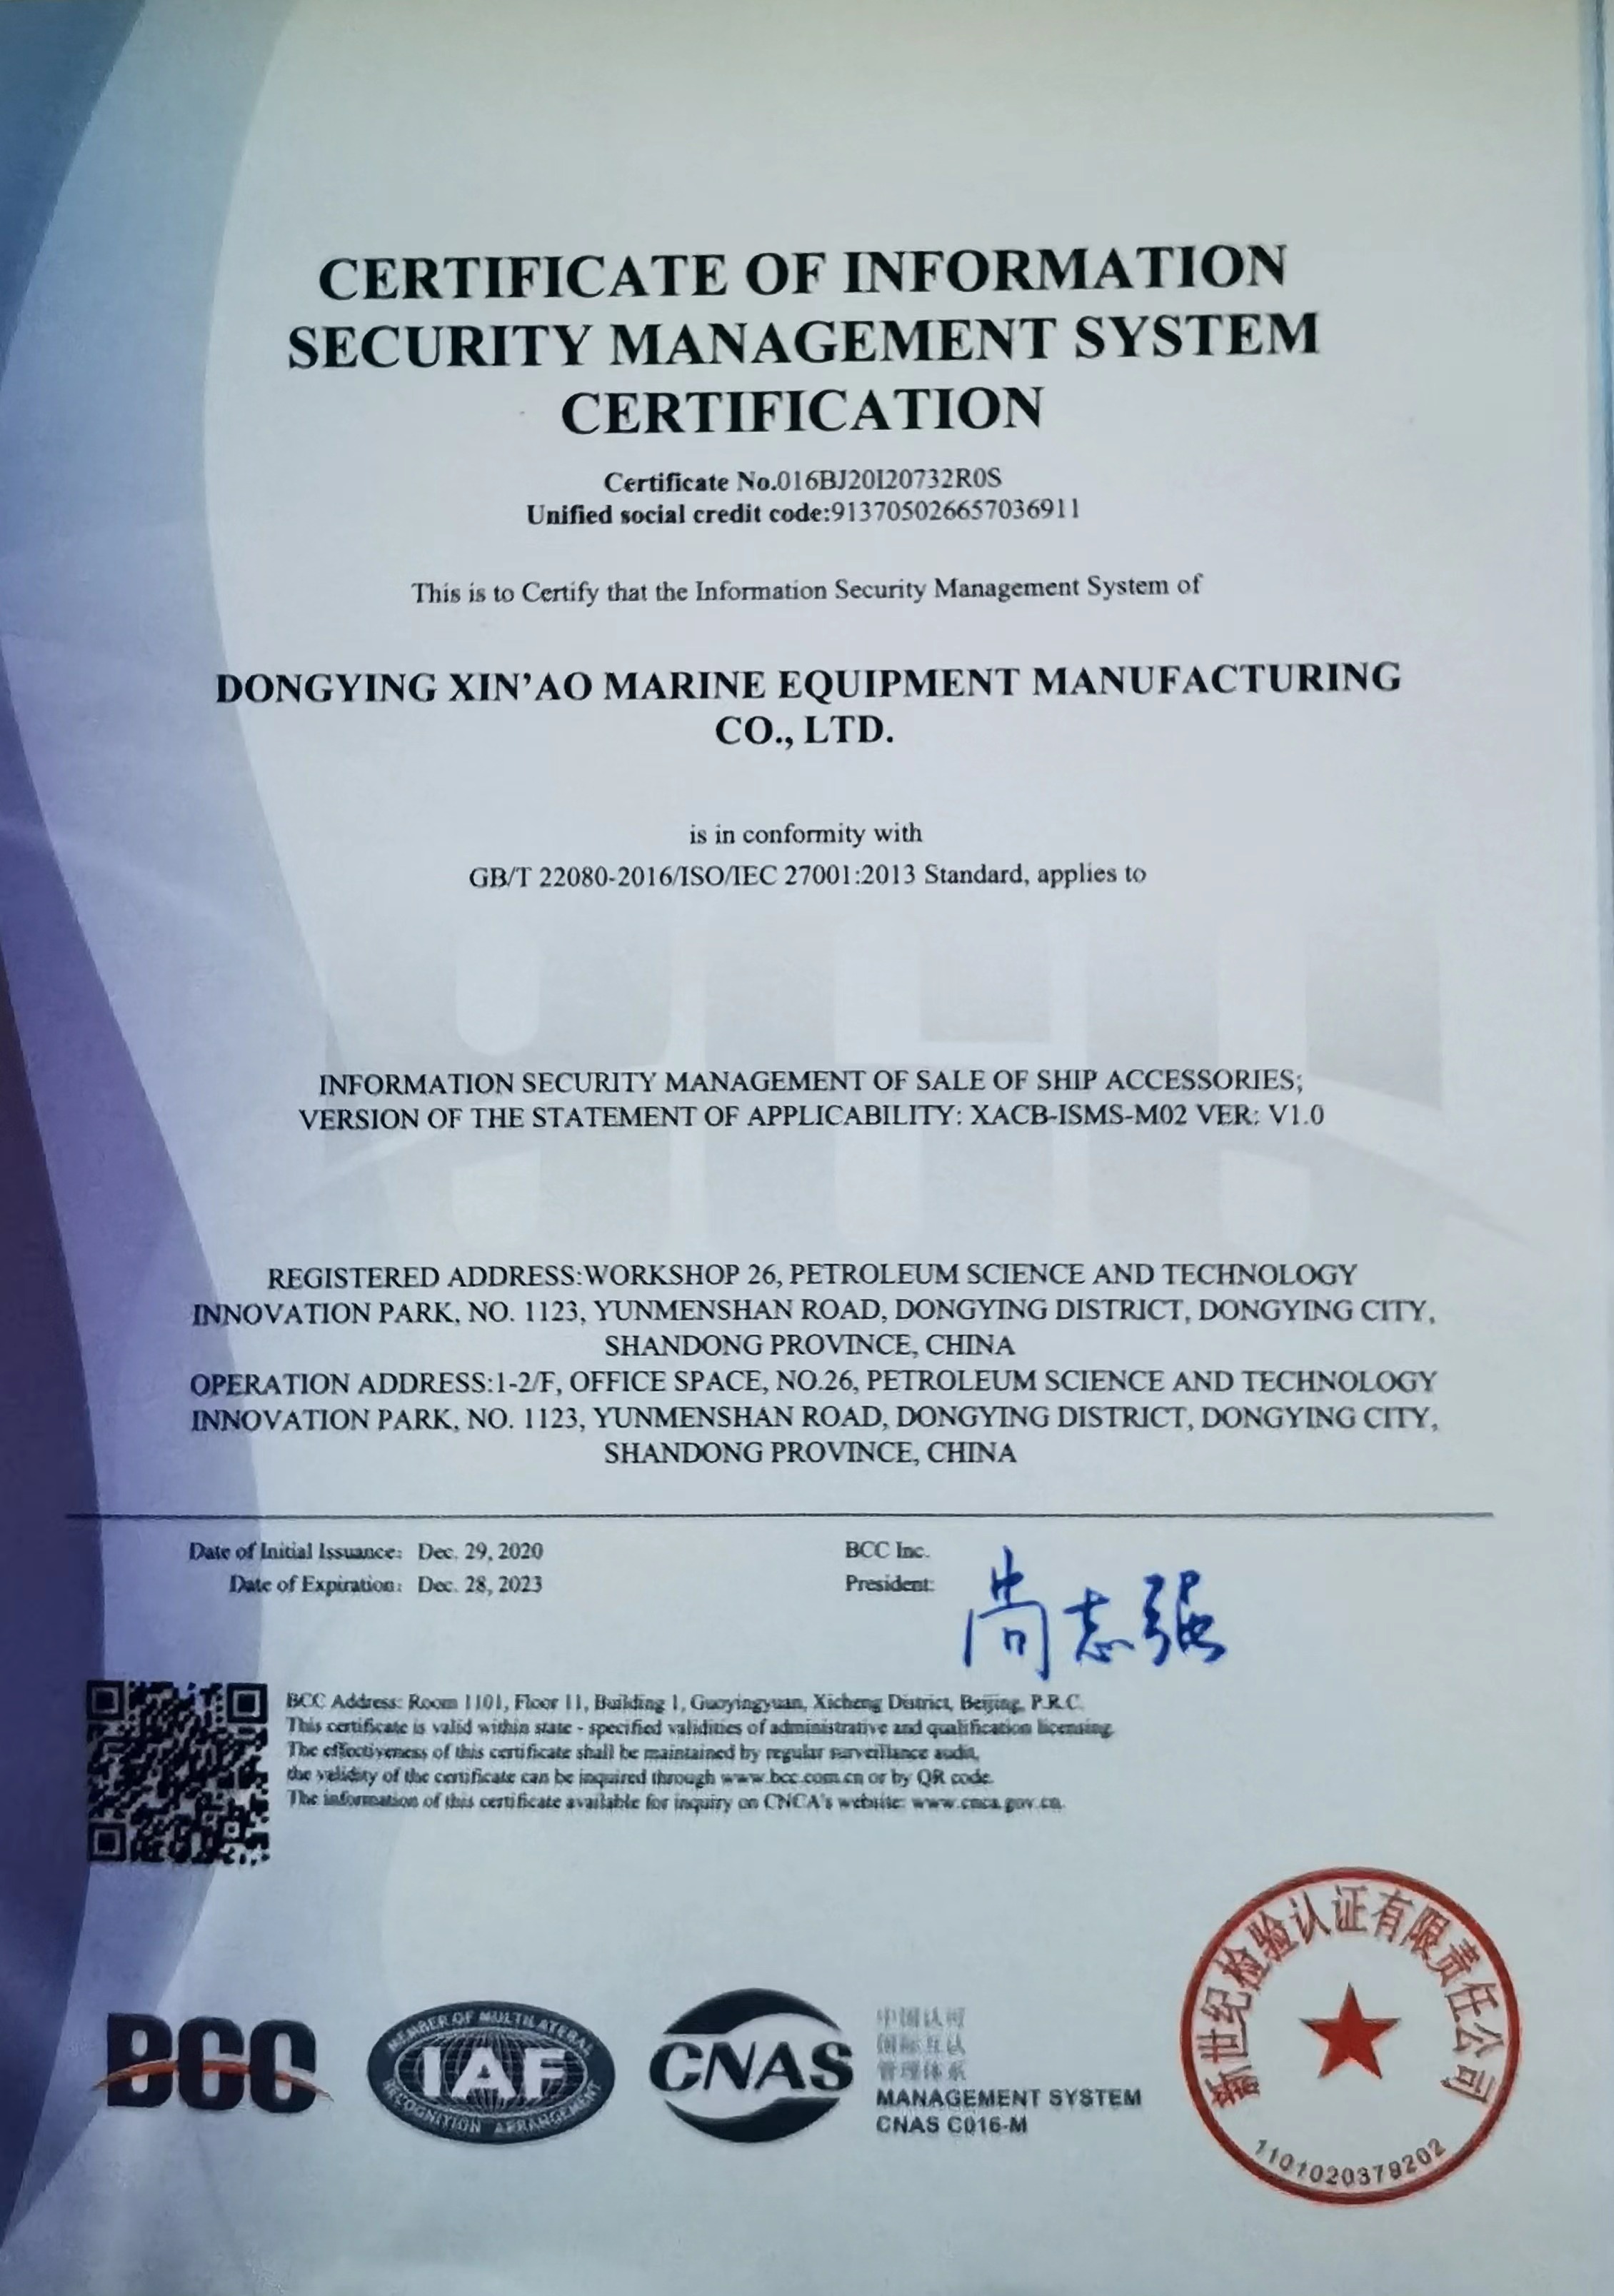 Certificate OfInformation Security Manacement System Certification 